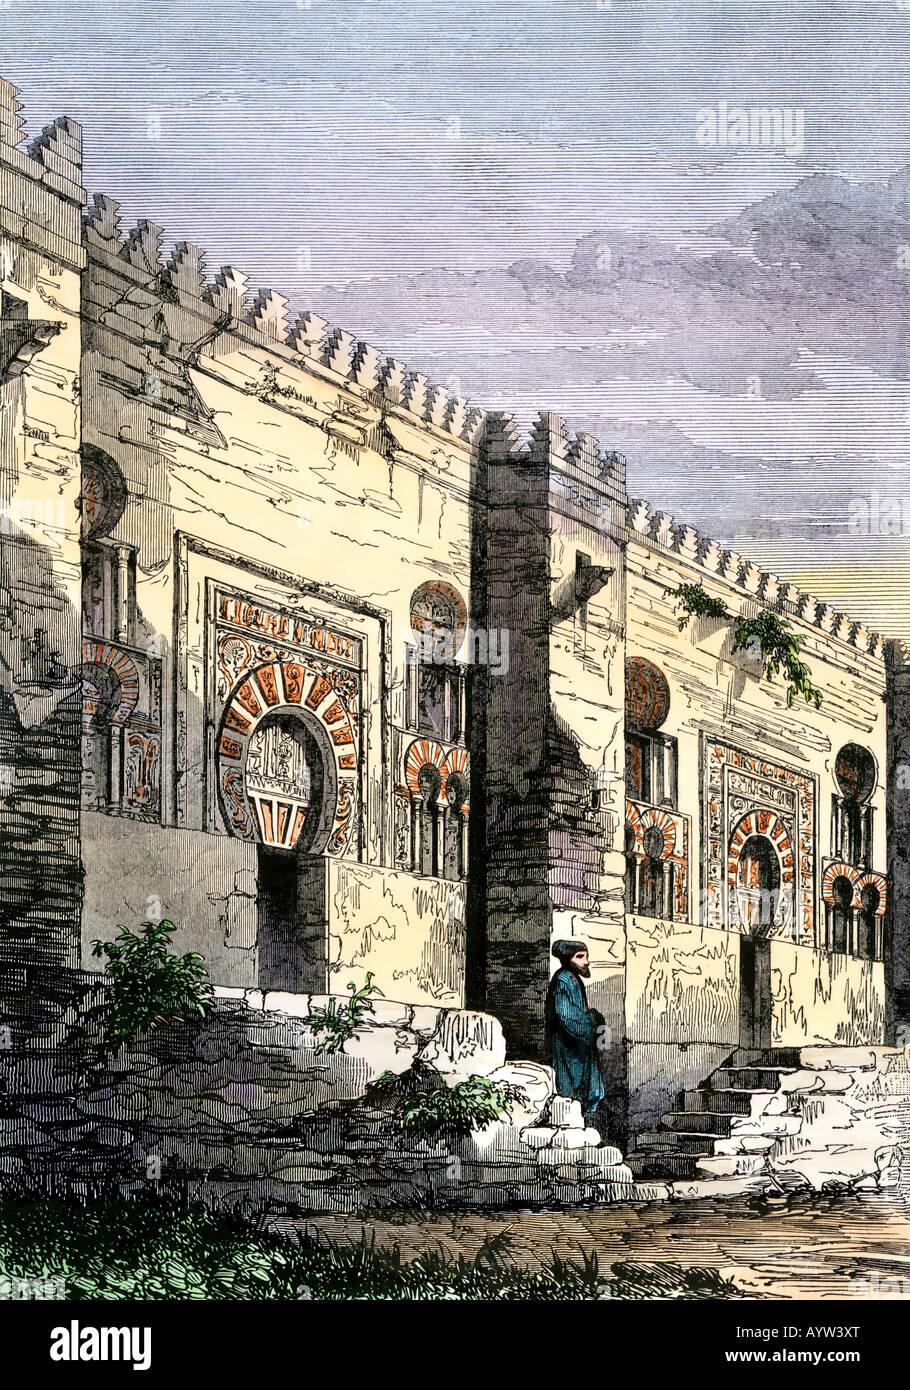 Mosque of Cordova Spain founded by Moorish King Abderahman I about 692. Hand-colored woodcut Stock Photo